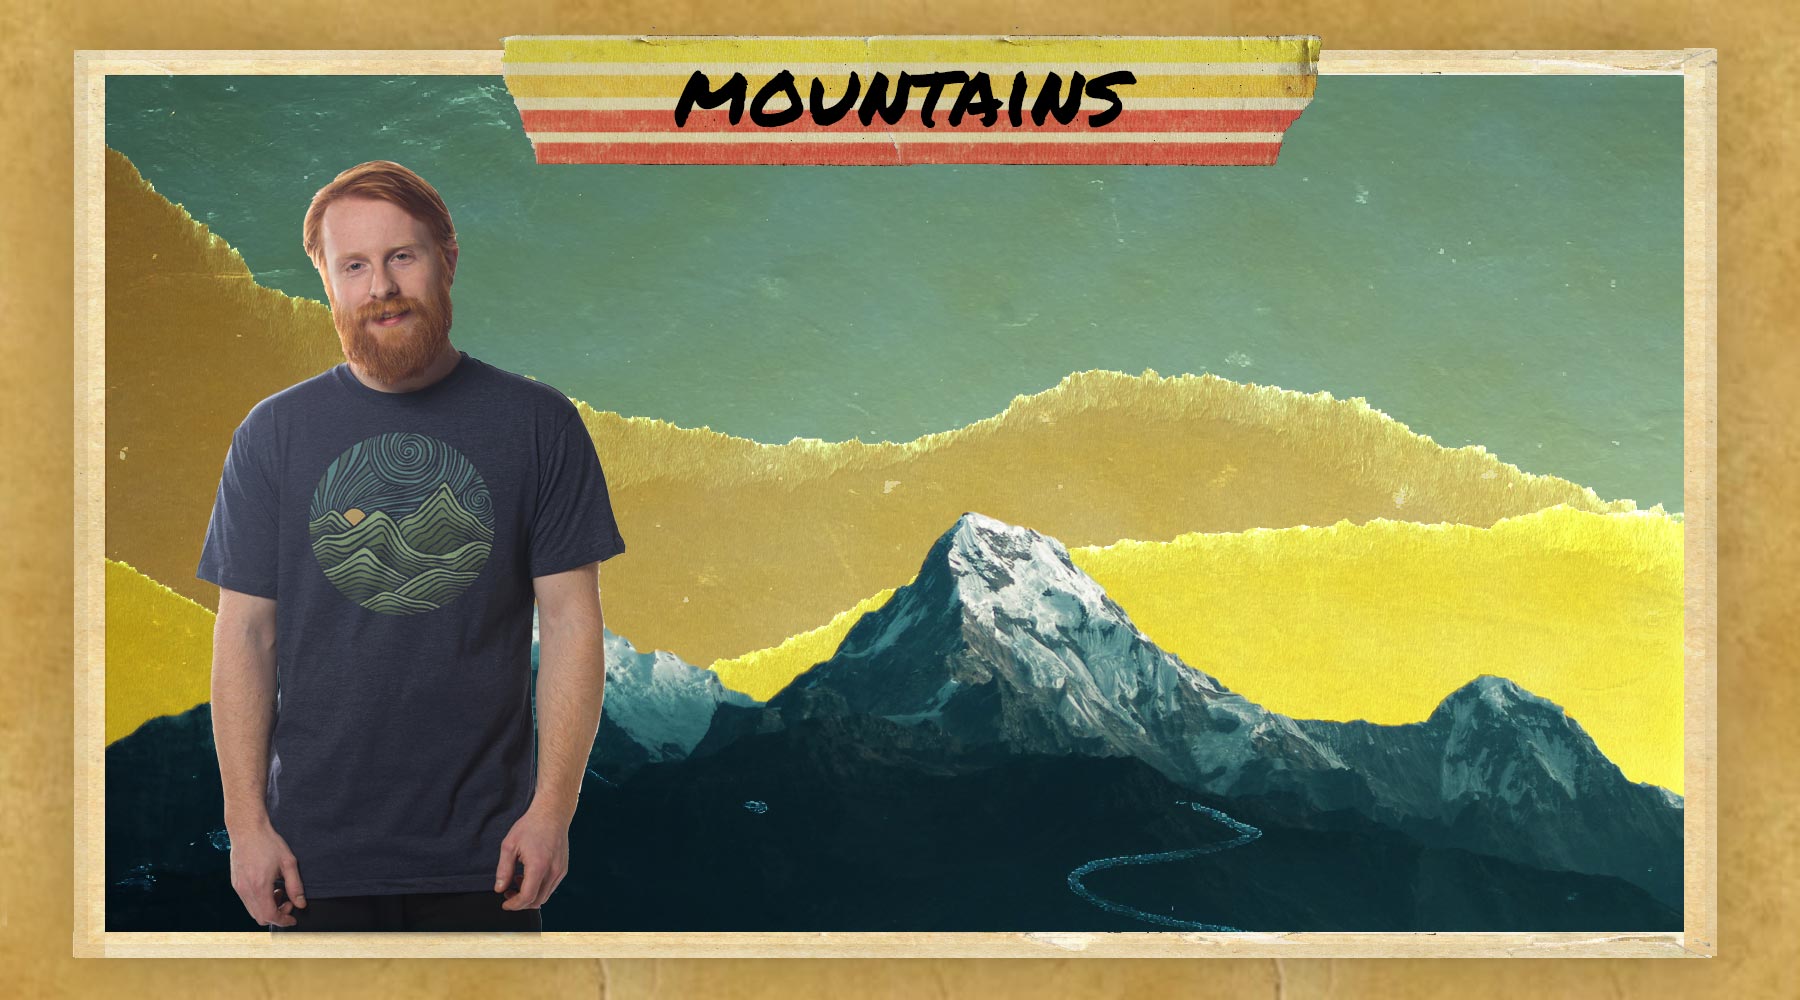 mountains_vintage_tee_shirts_with_cool_funny_retro_hiking_rock_climbing_graphic